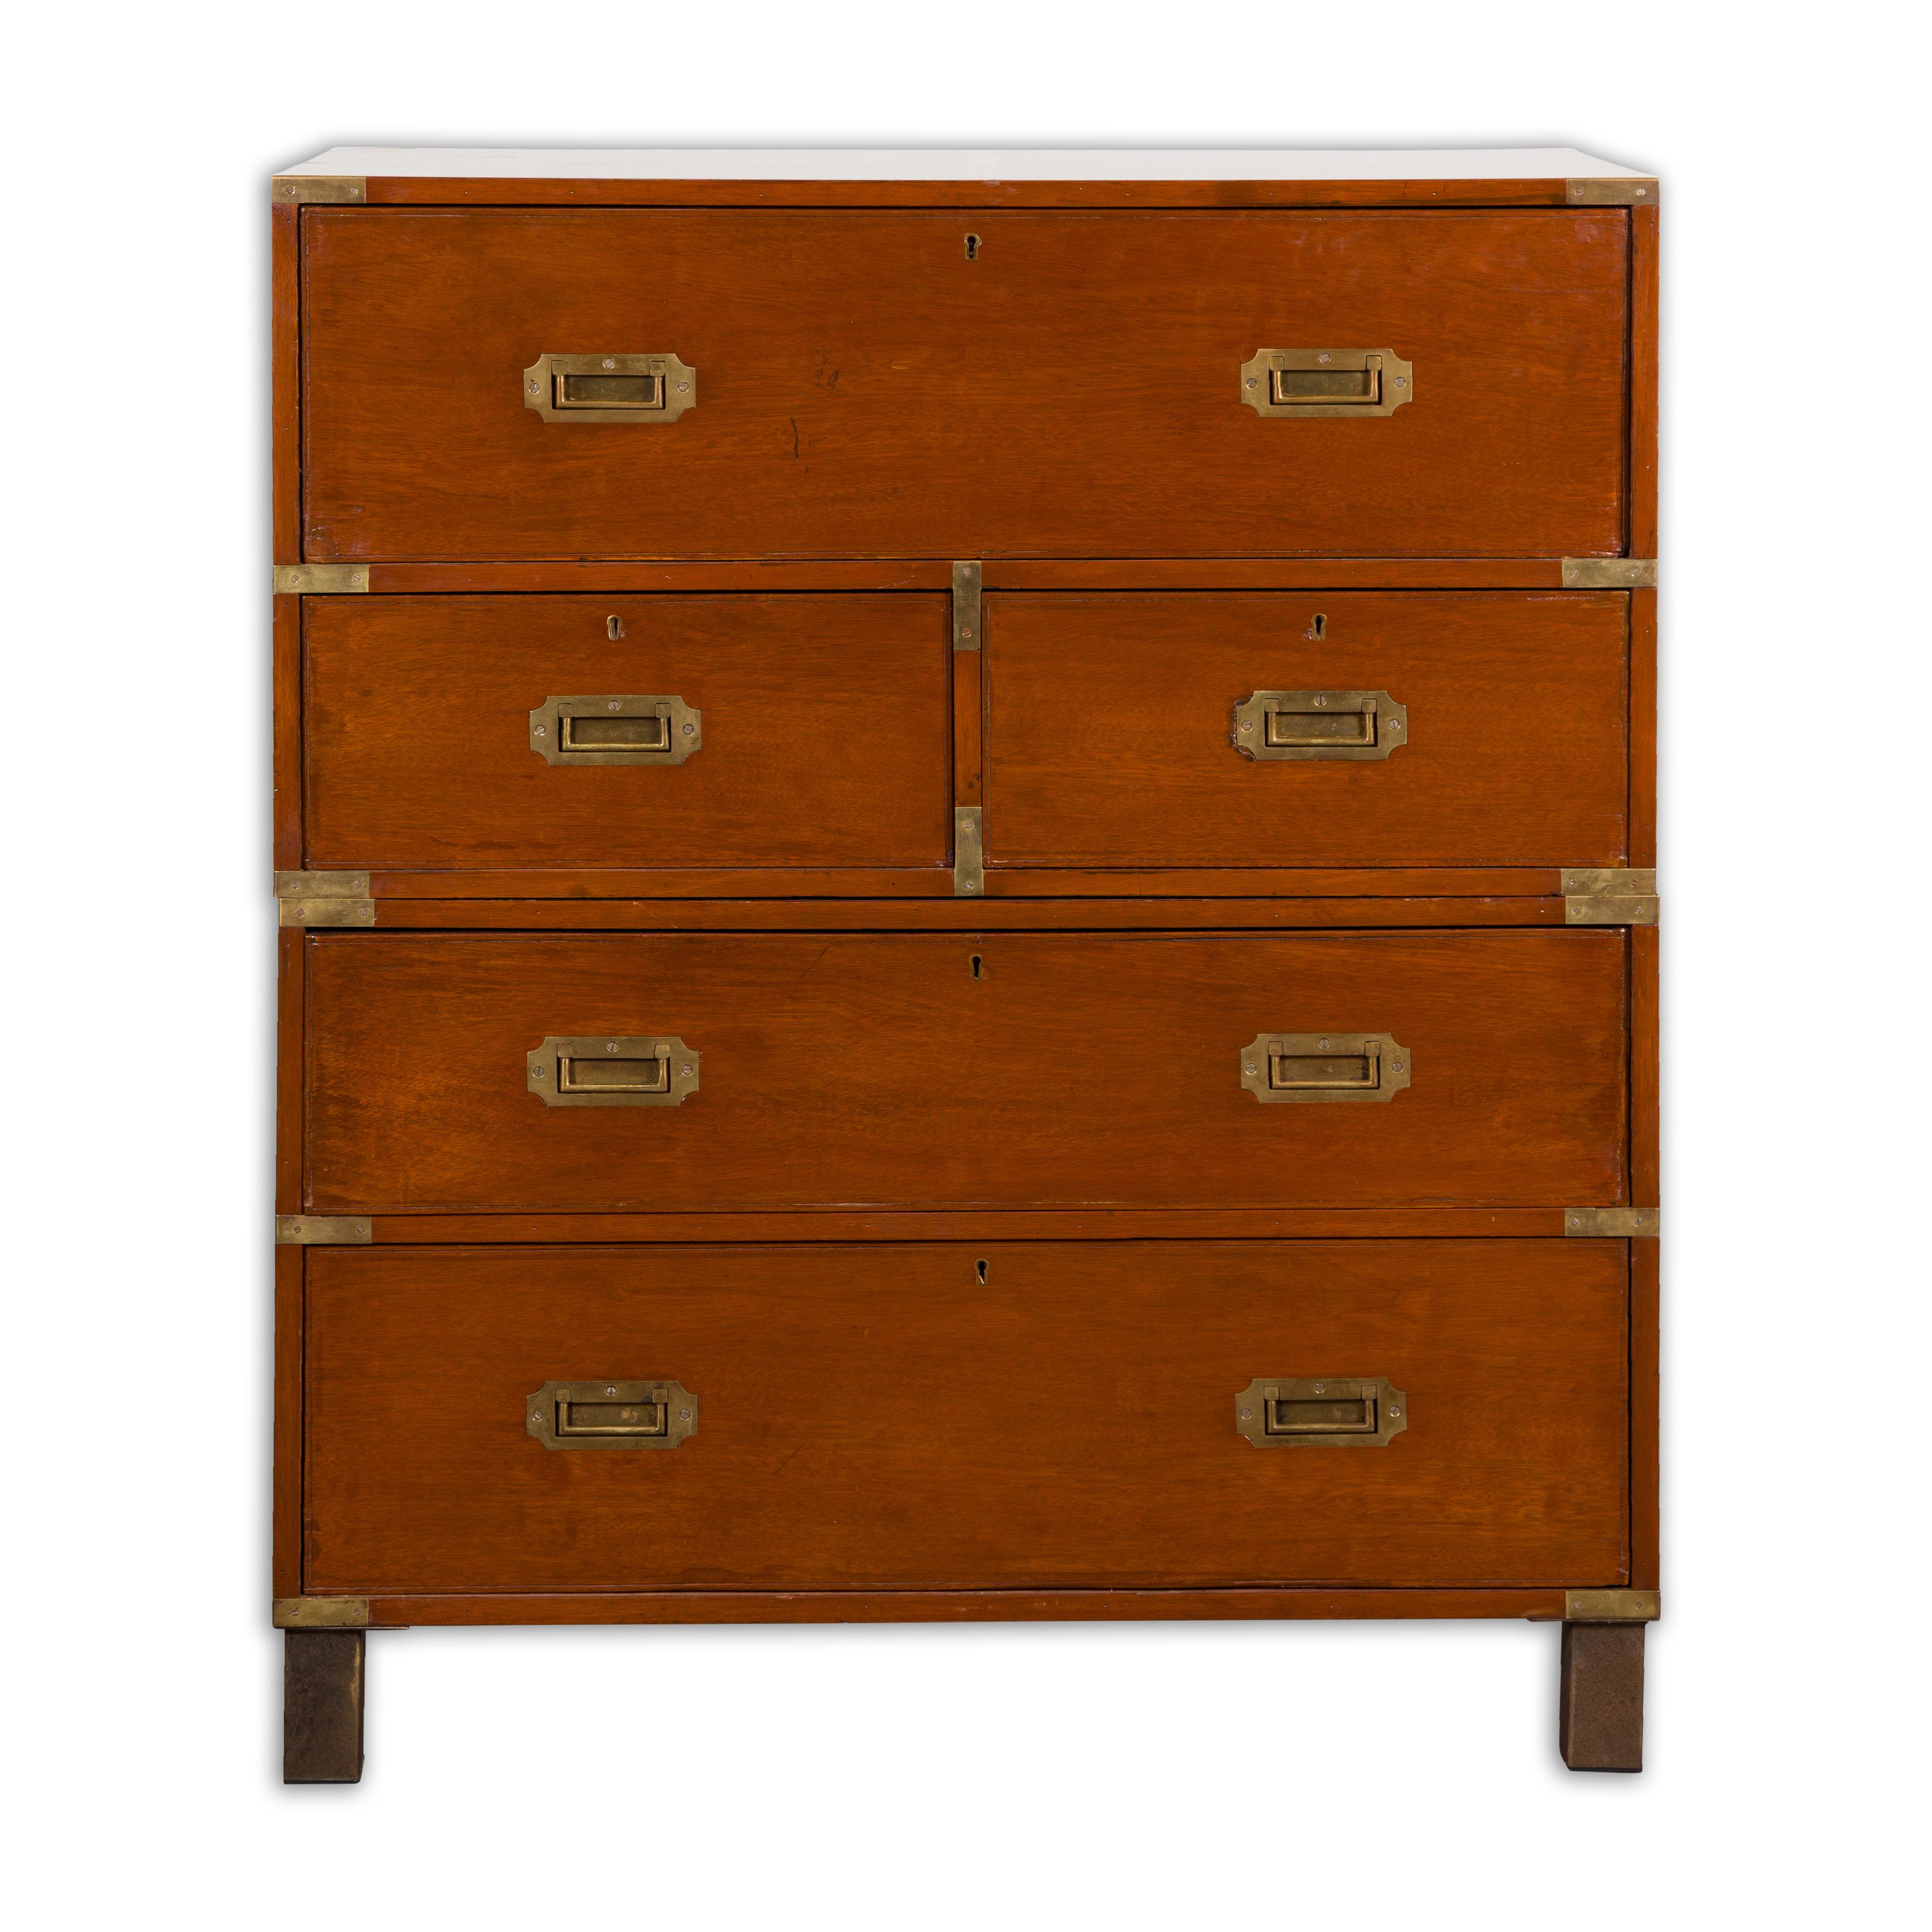 An English Campaign chest from the 19th century, with drop front desk, four drawers and brass hardware. Add a touch of antique charm to your home with this English Campaign two-part chest from the 19th century. Crafted in England, this chest